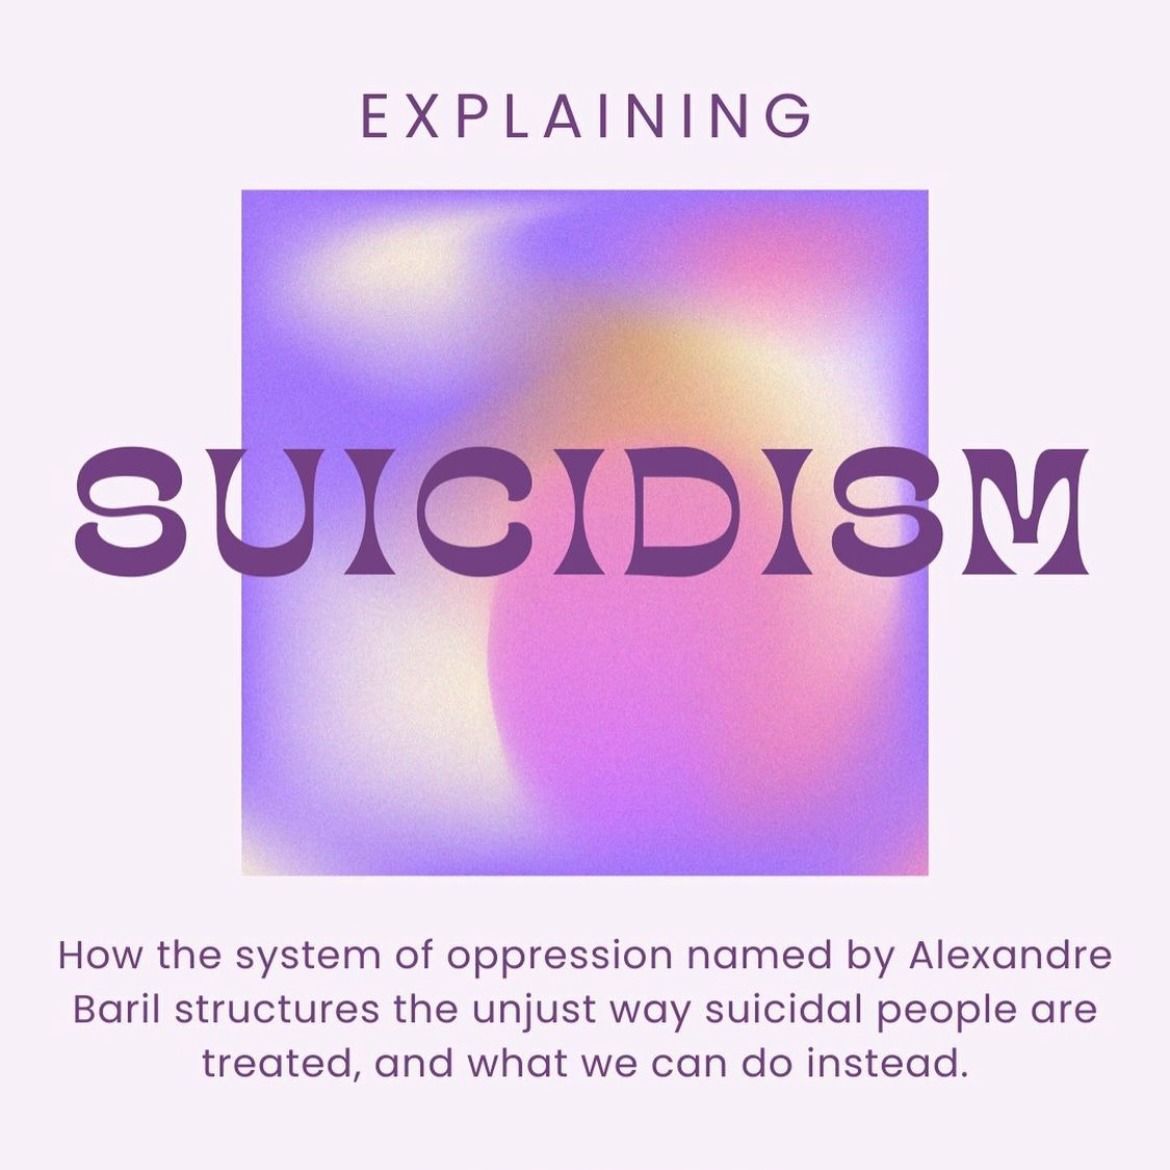 How the system of oppression named by Baril structures the unjust way suicidal people are treated, and what we can do instead